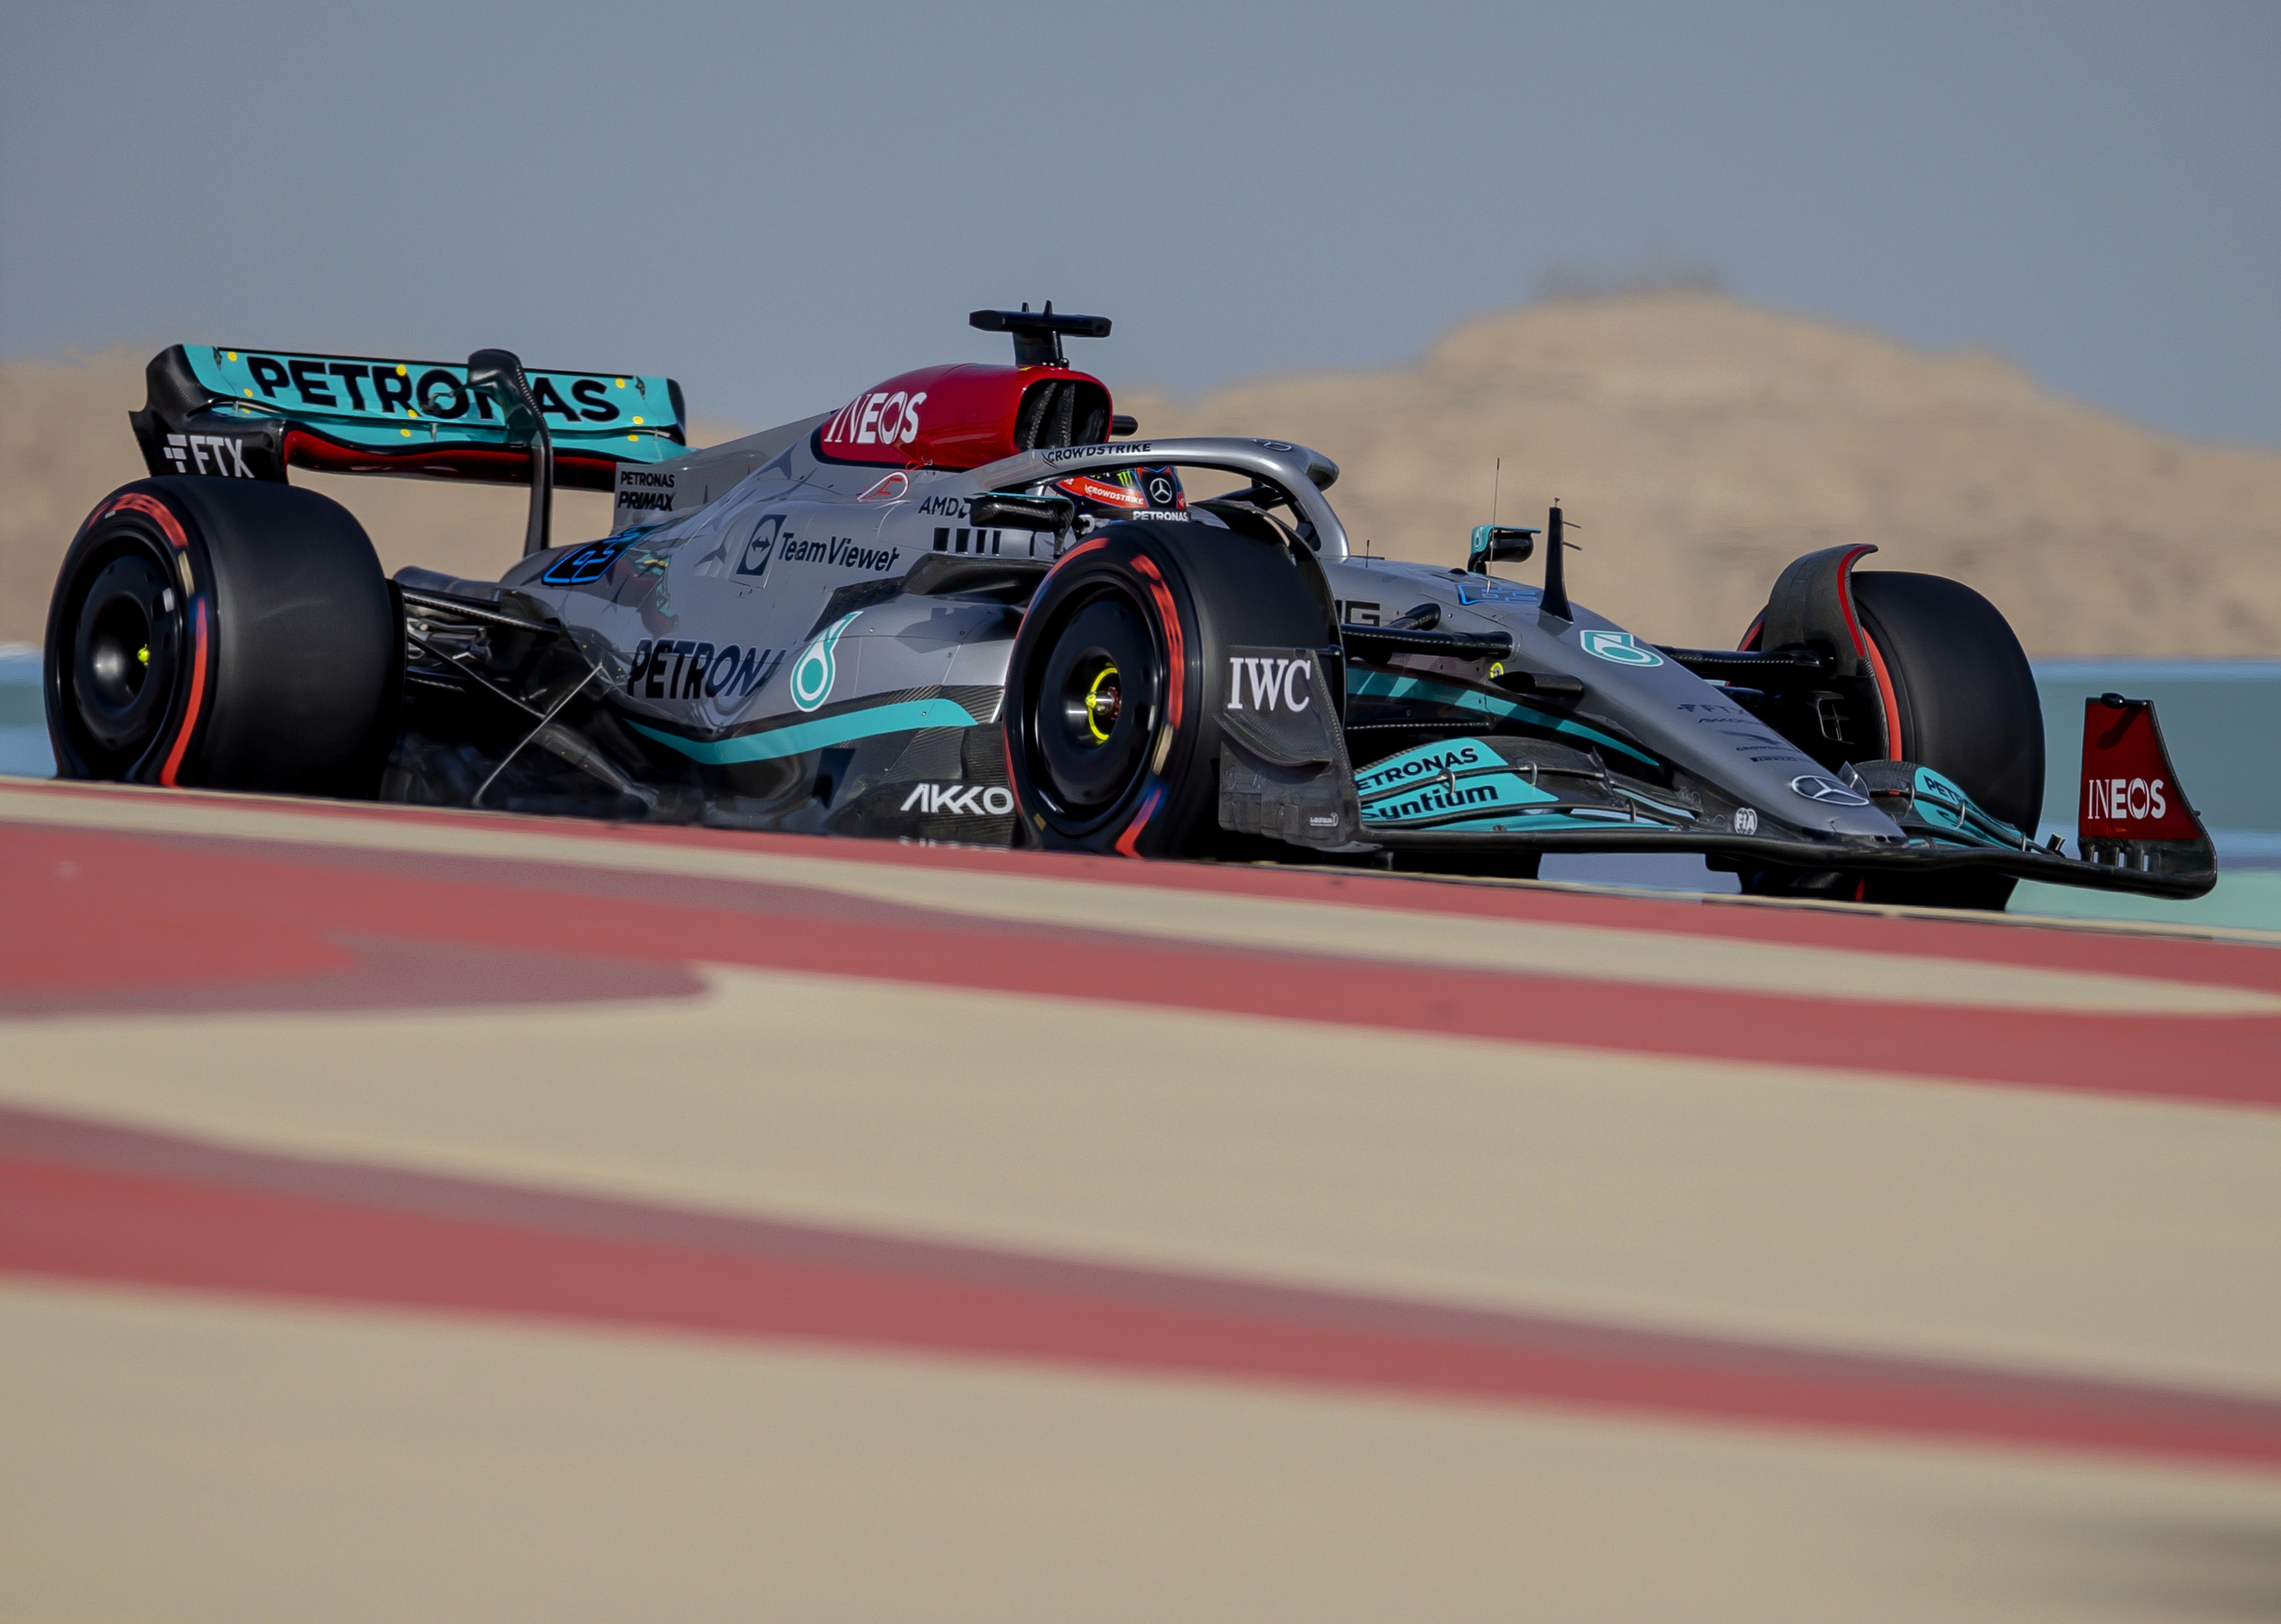 F1s 2022 Season Is More Than Max and Lewis